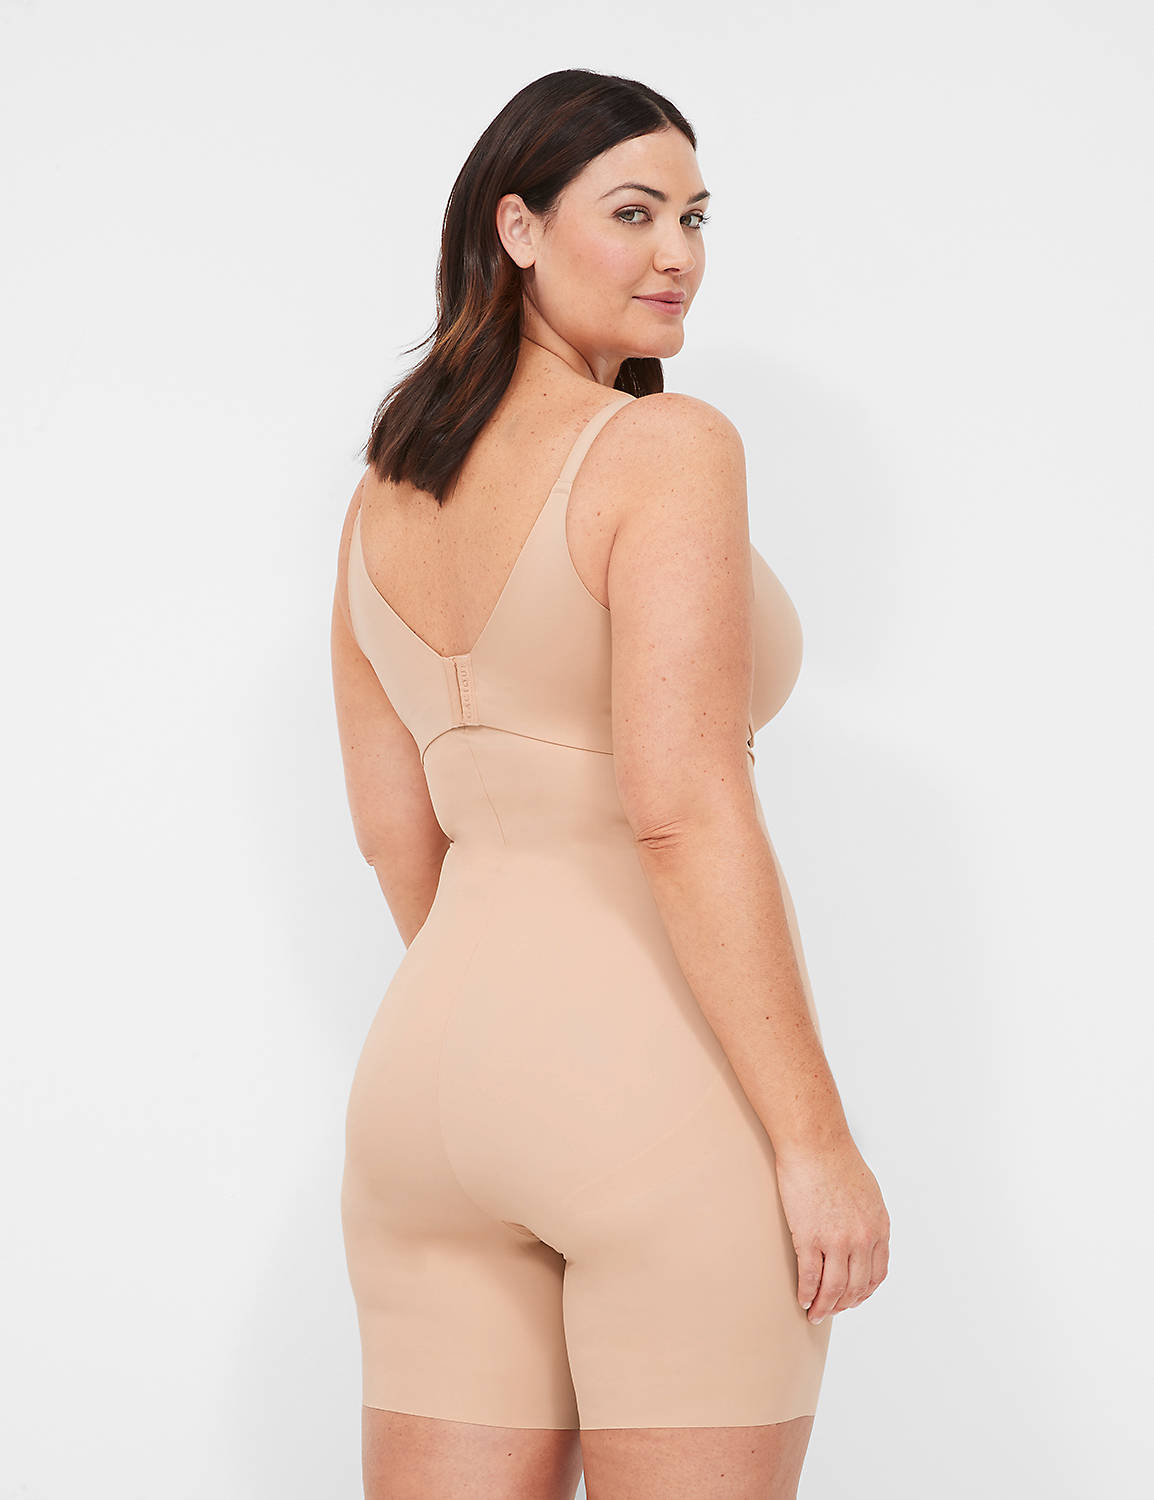 How To Use Shapewear To Target Specific Body Parts? - Version 2